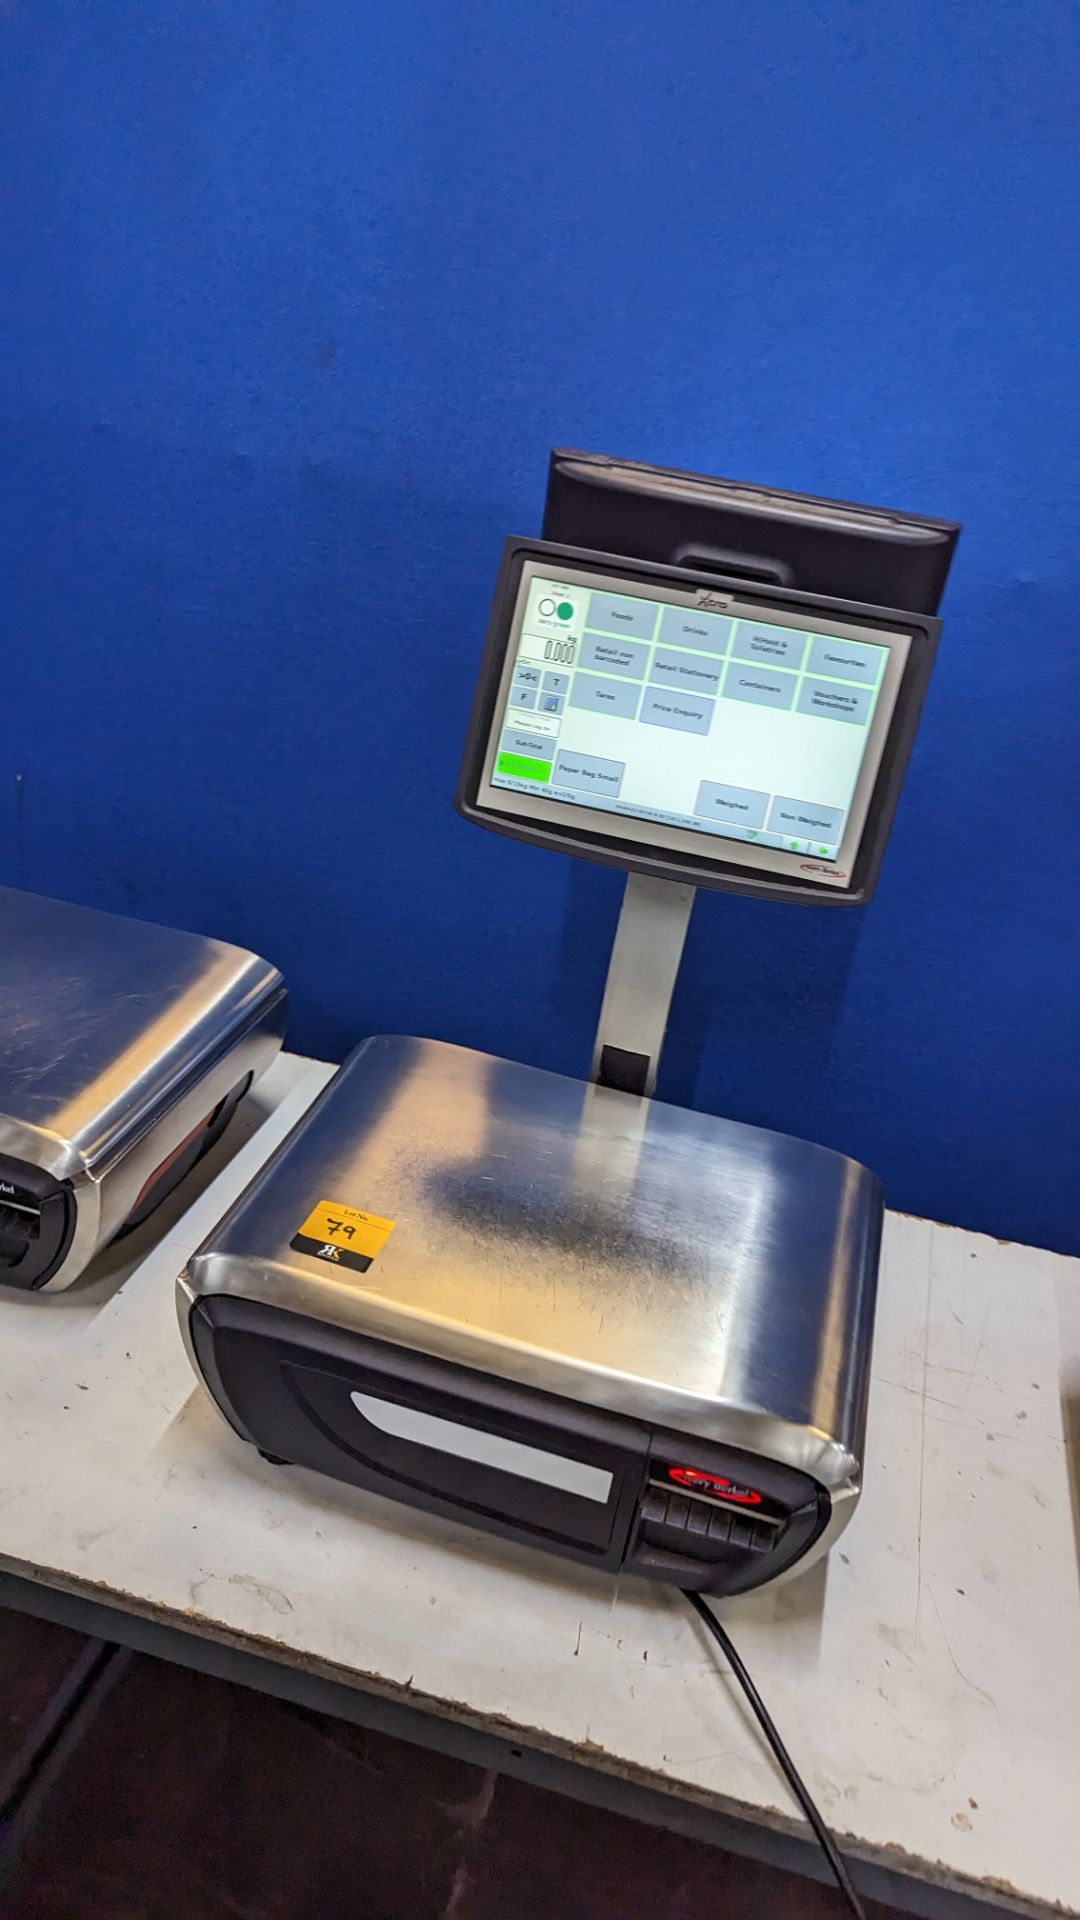 Avery Berkel Xti 400 Label & Receipt printing scale. 6kg/15kg capacity. These scales include a 10" - Image 14 of 17